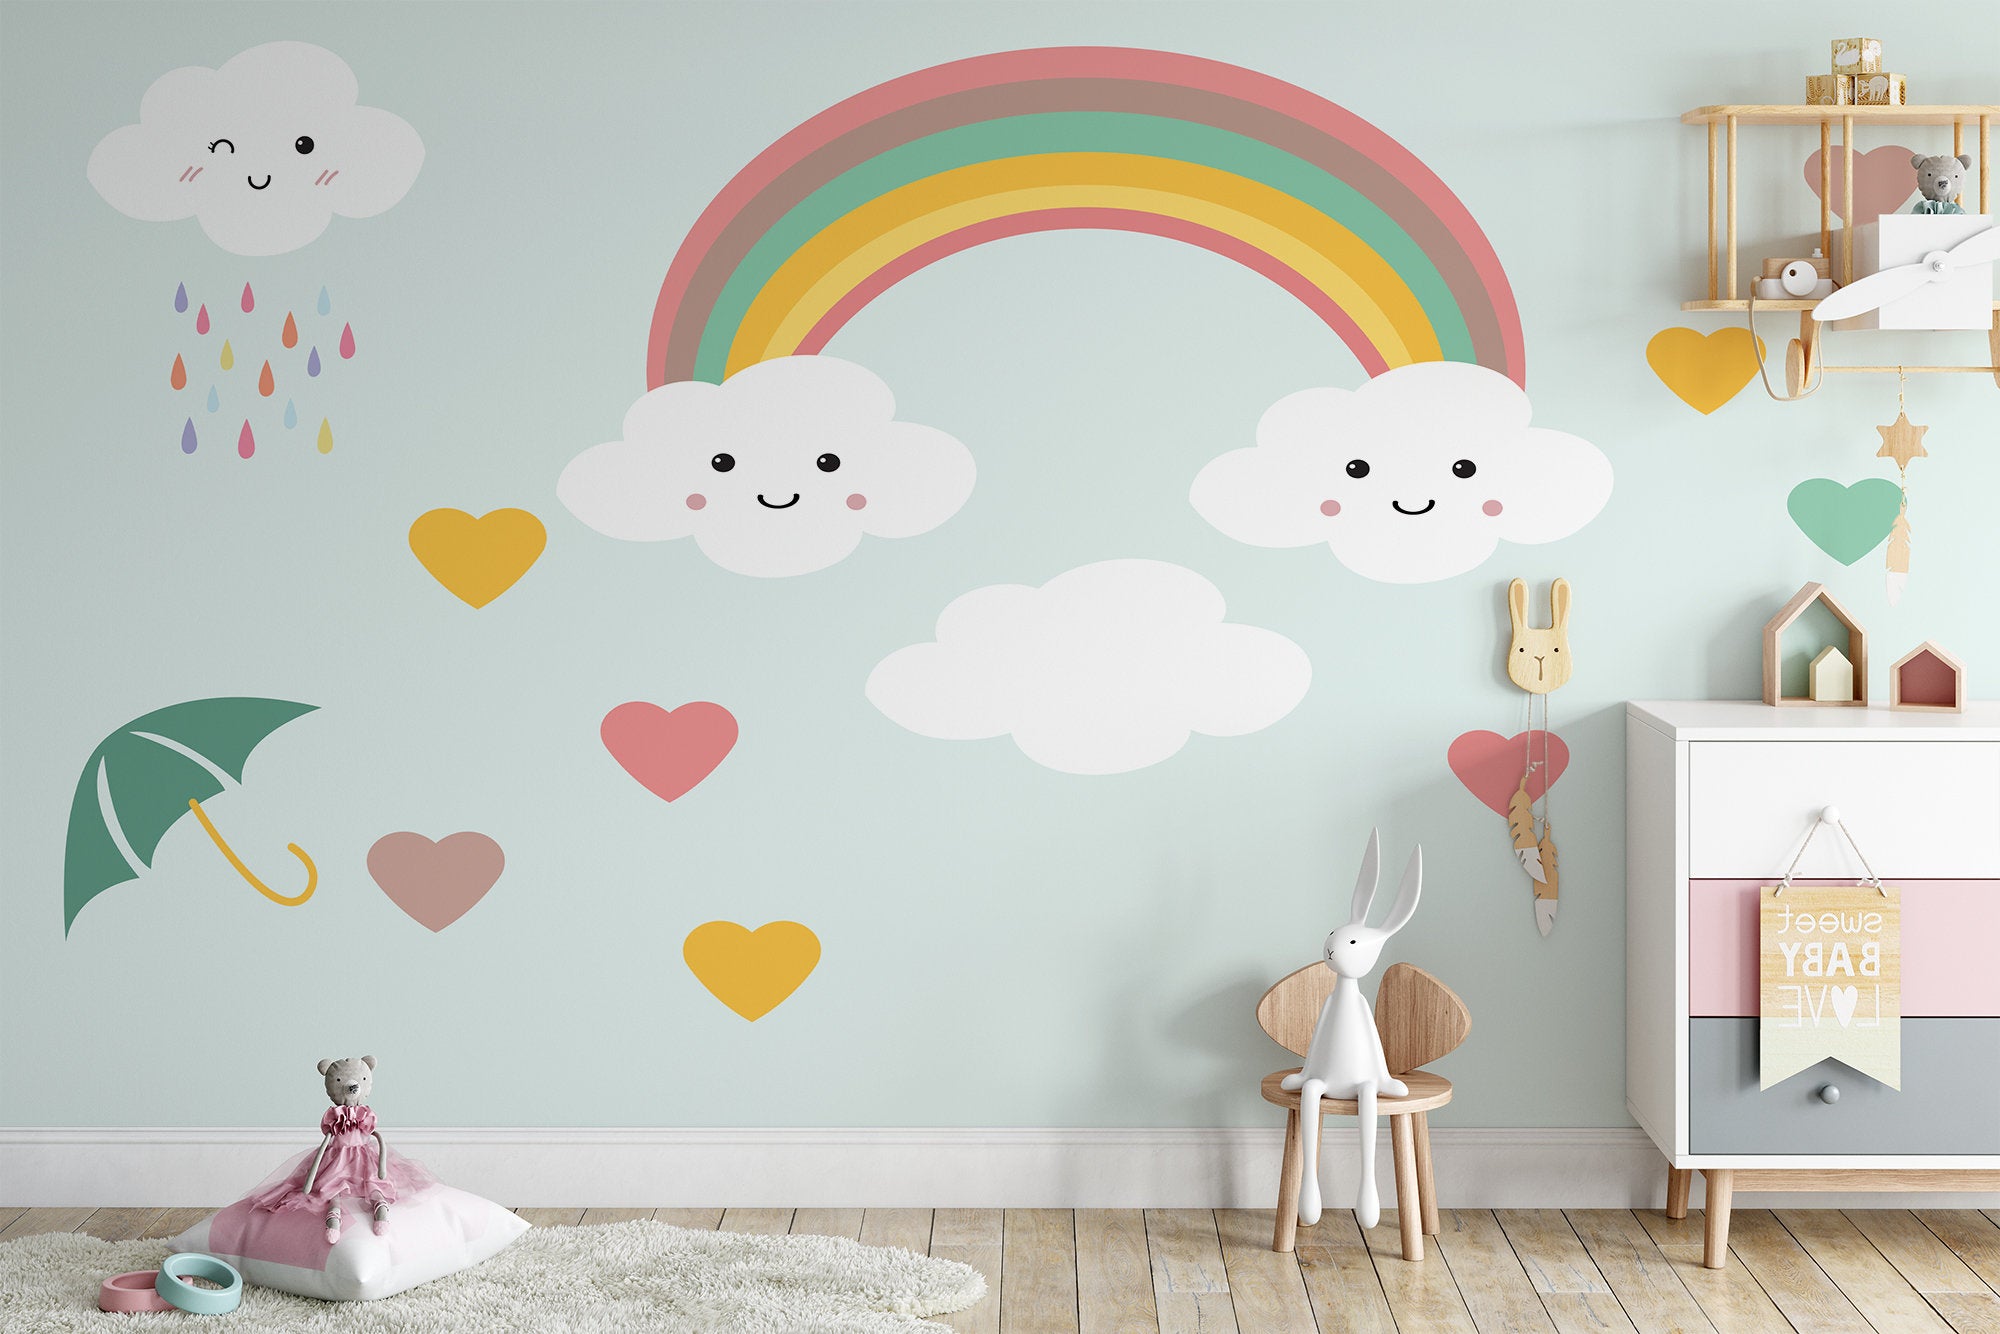 Rainbow Above Clouds Smiling Colorful Hearts Wallpaper Nursery Bedroom Children Kids Room Mural Home Decor Wall Art Removable